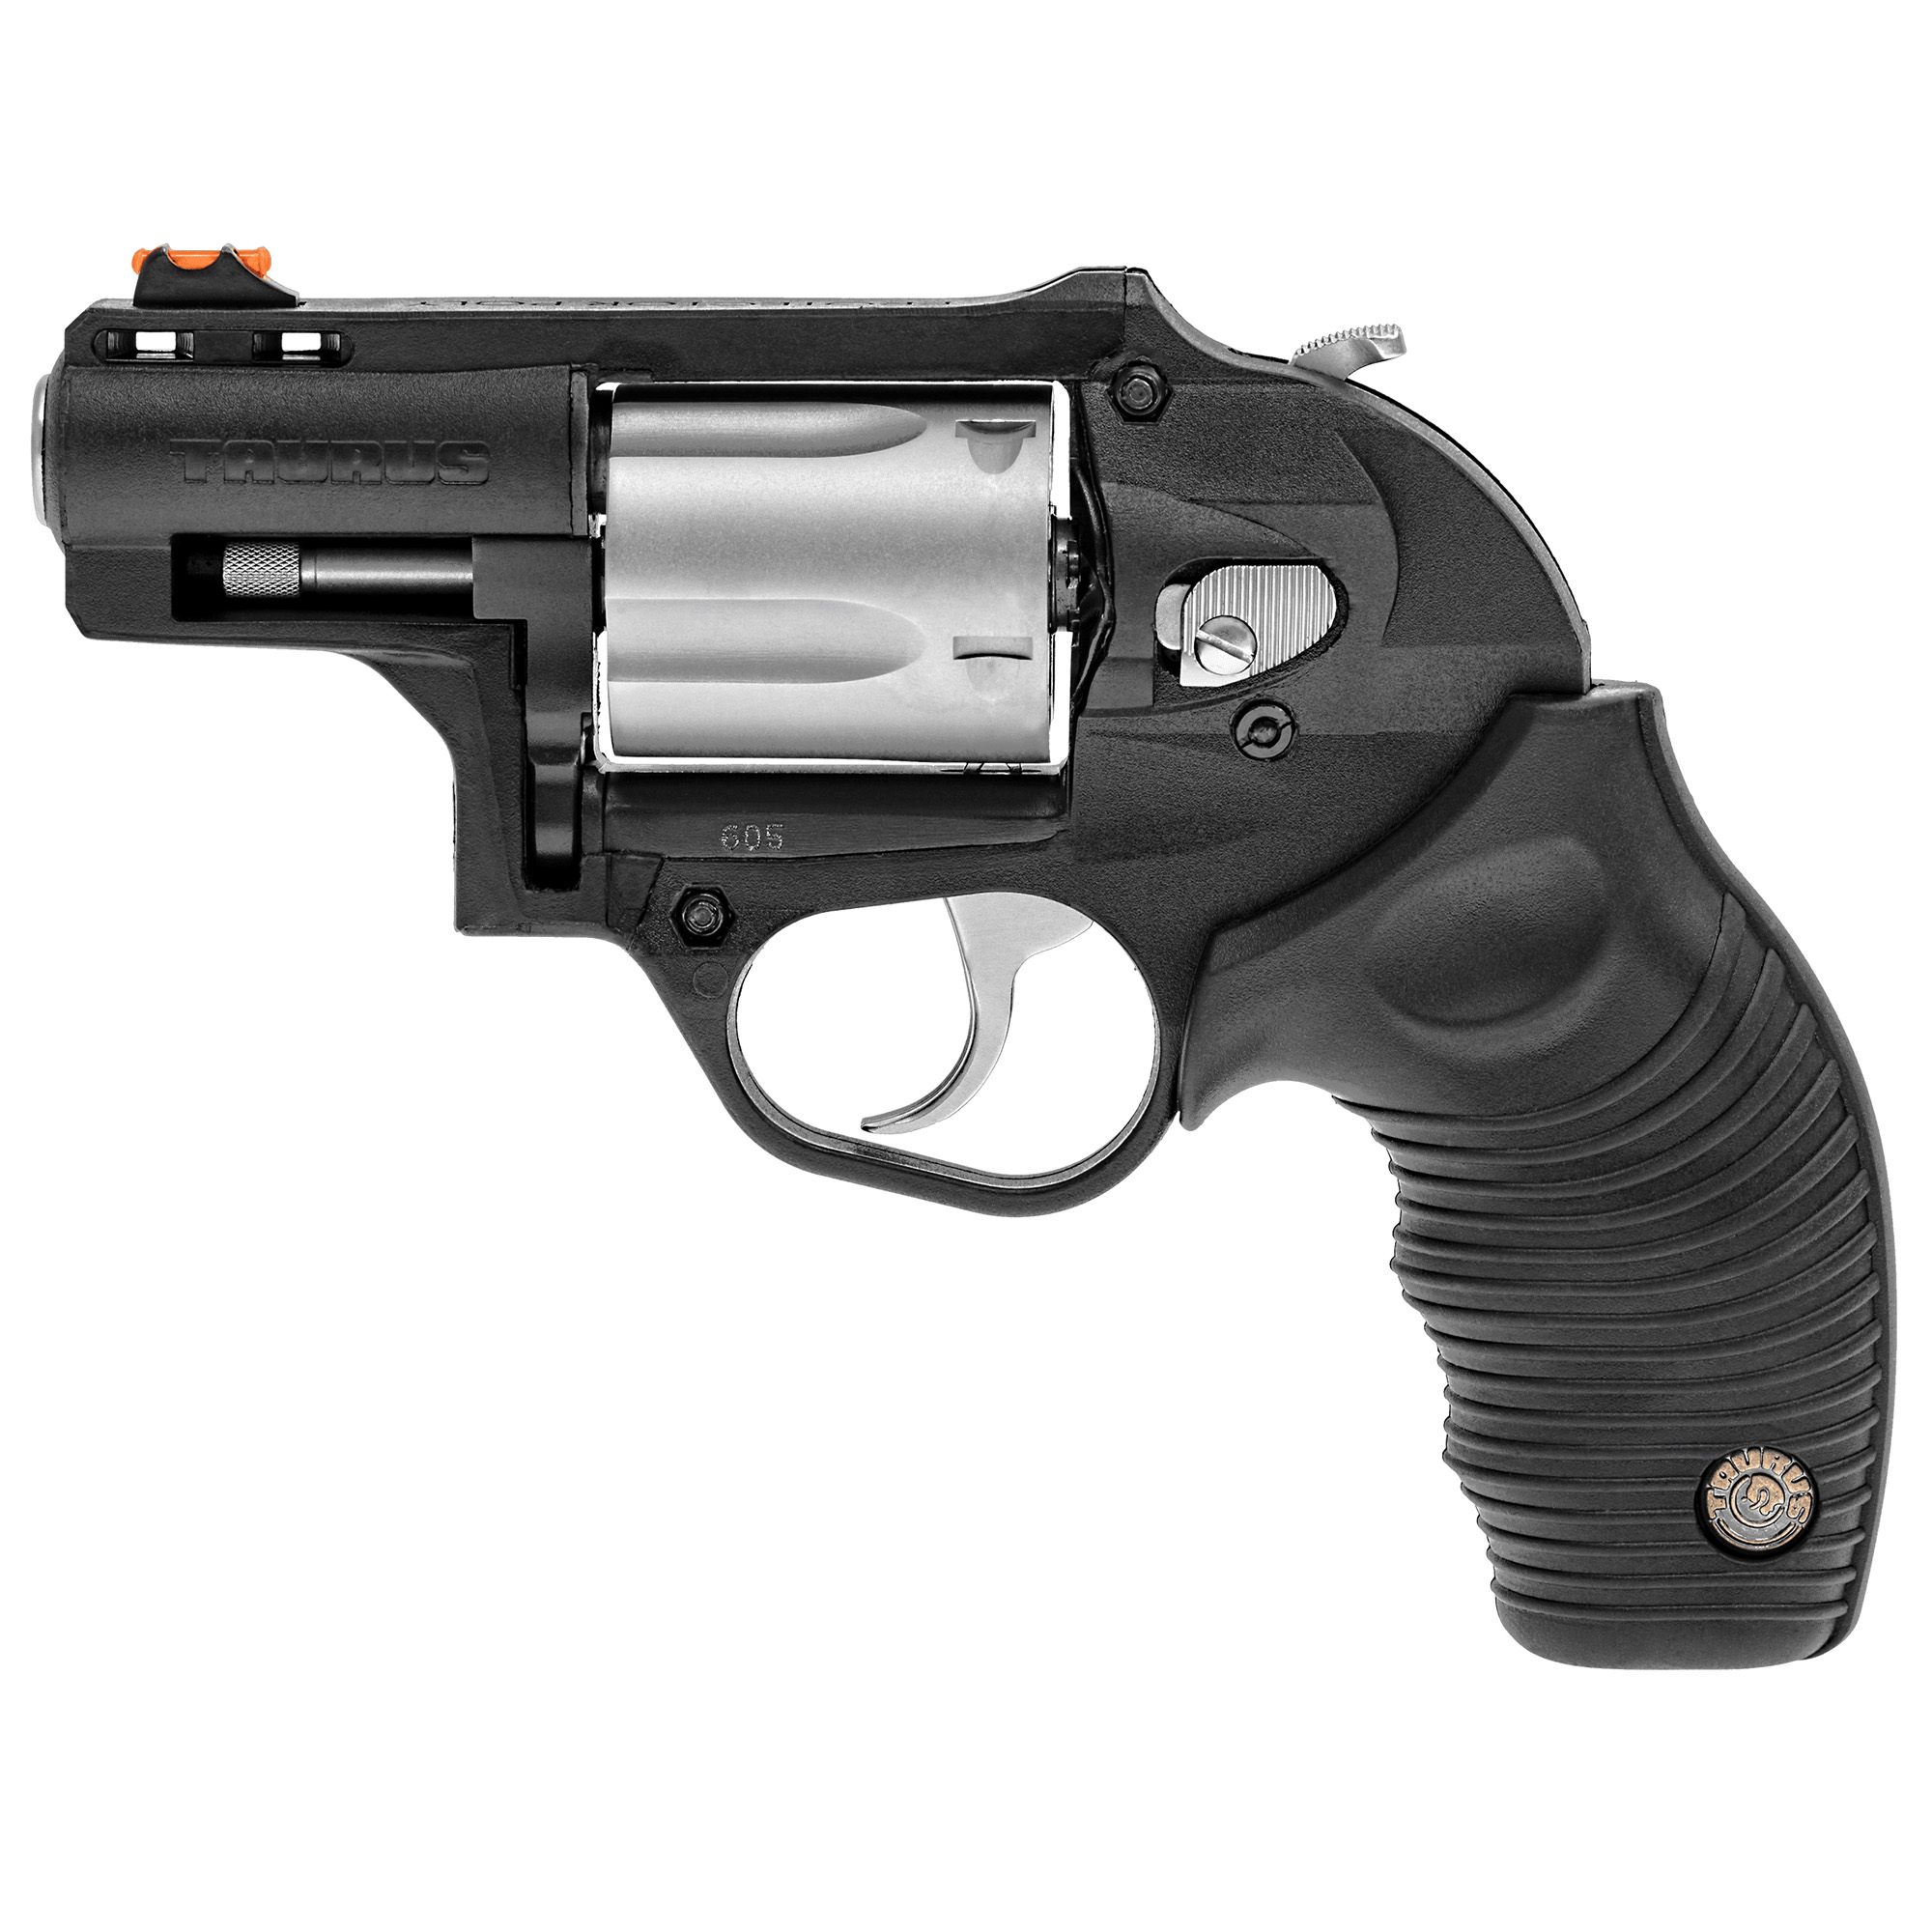 TAURUS 605 357MAG 2 5RD STS POLY